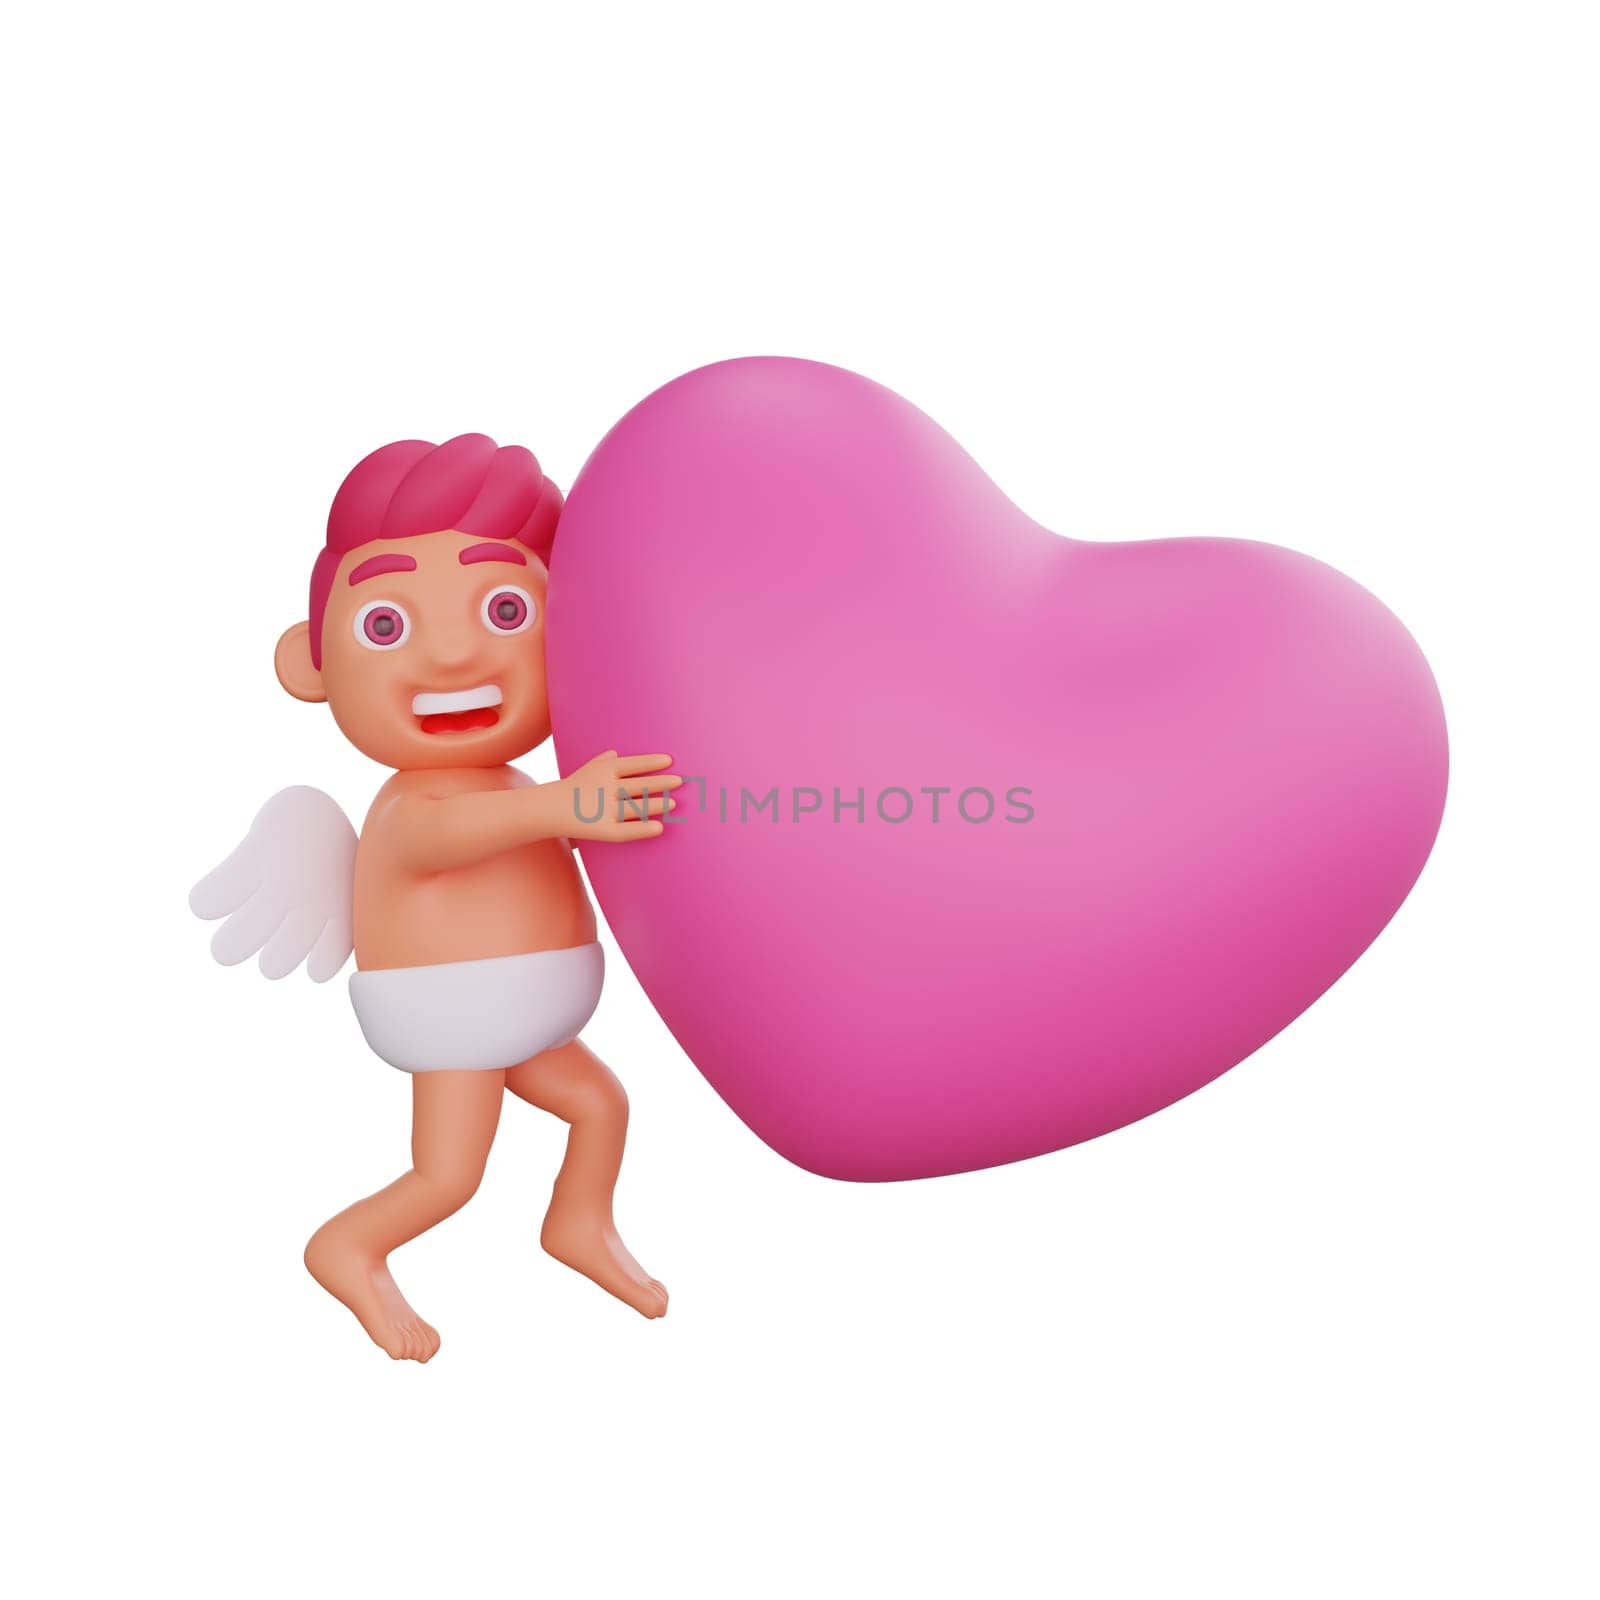 3D illustration of Valentine Cupid character hugging a vibrant pink heart, symbolizing love and affection, perfect for Valentine or love themed projects